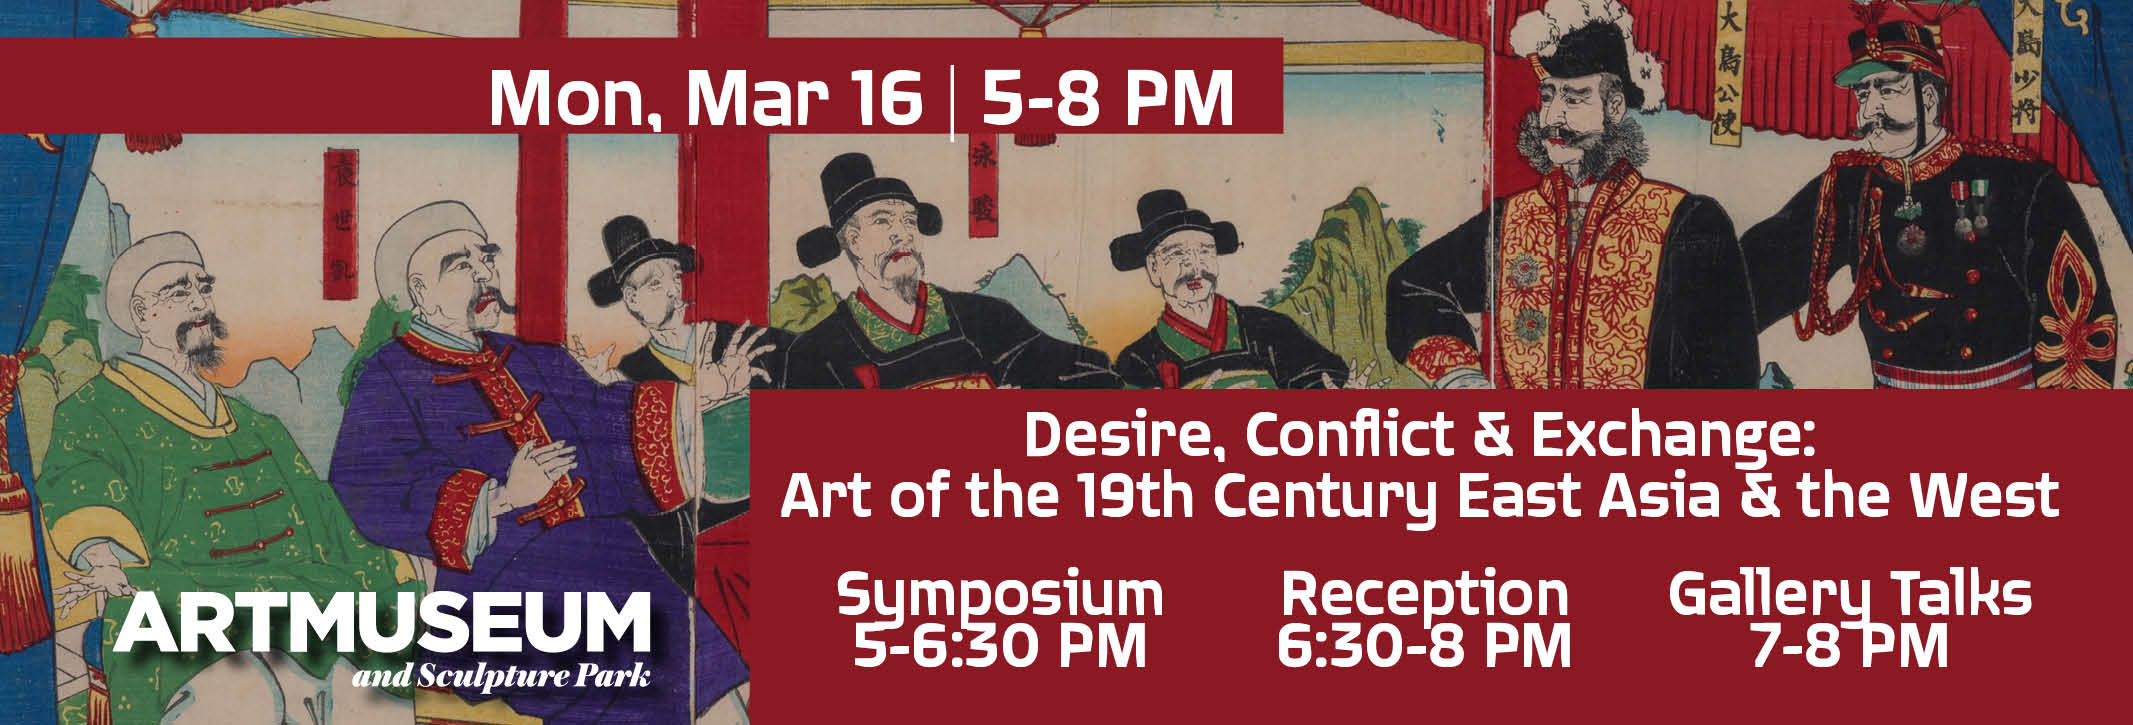 March 16, 2020 Capstone Exhibition Symposium, Reception and Gallery Talks 5-8 PM